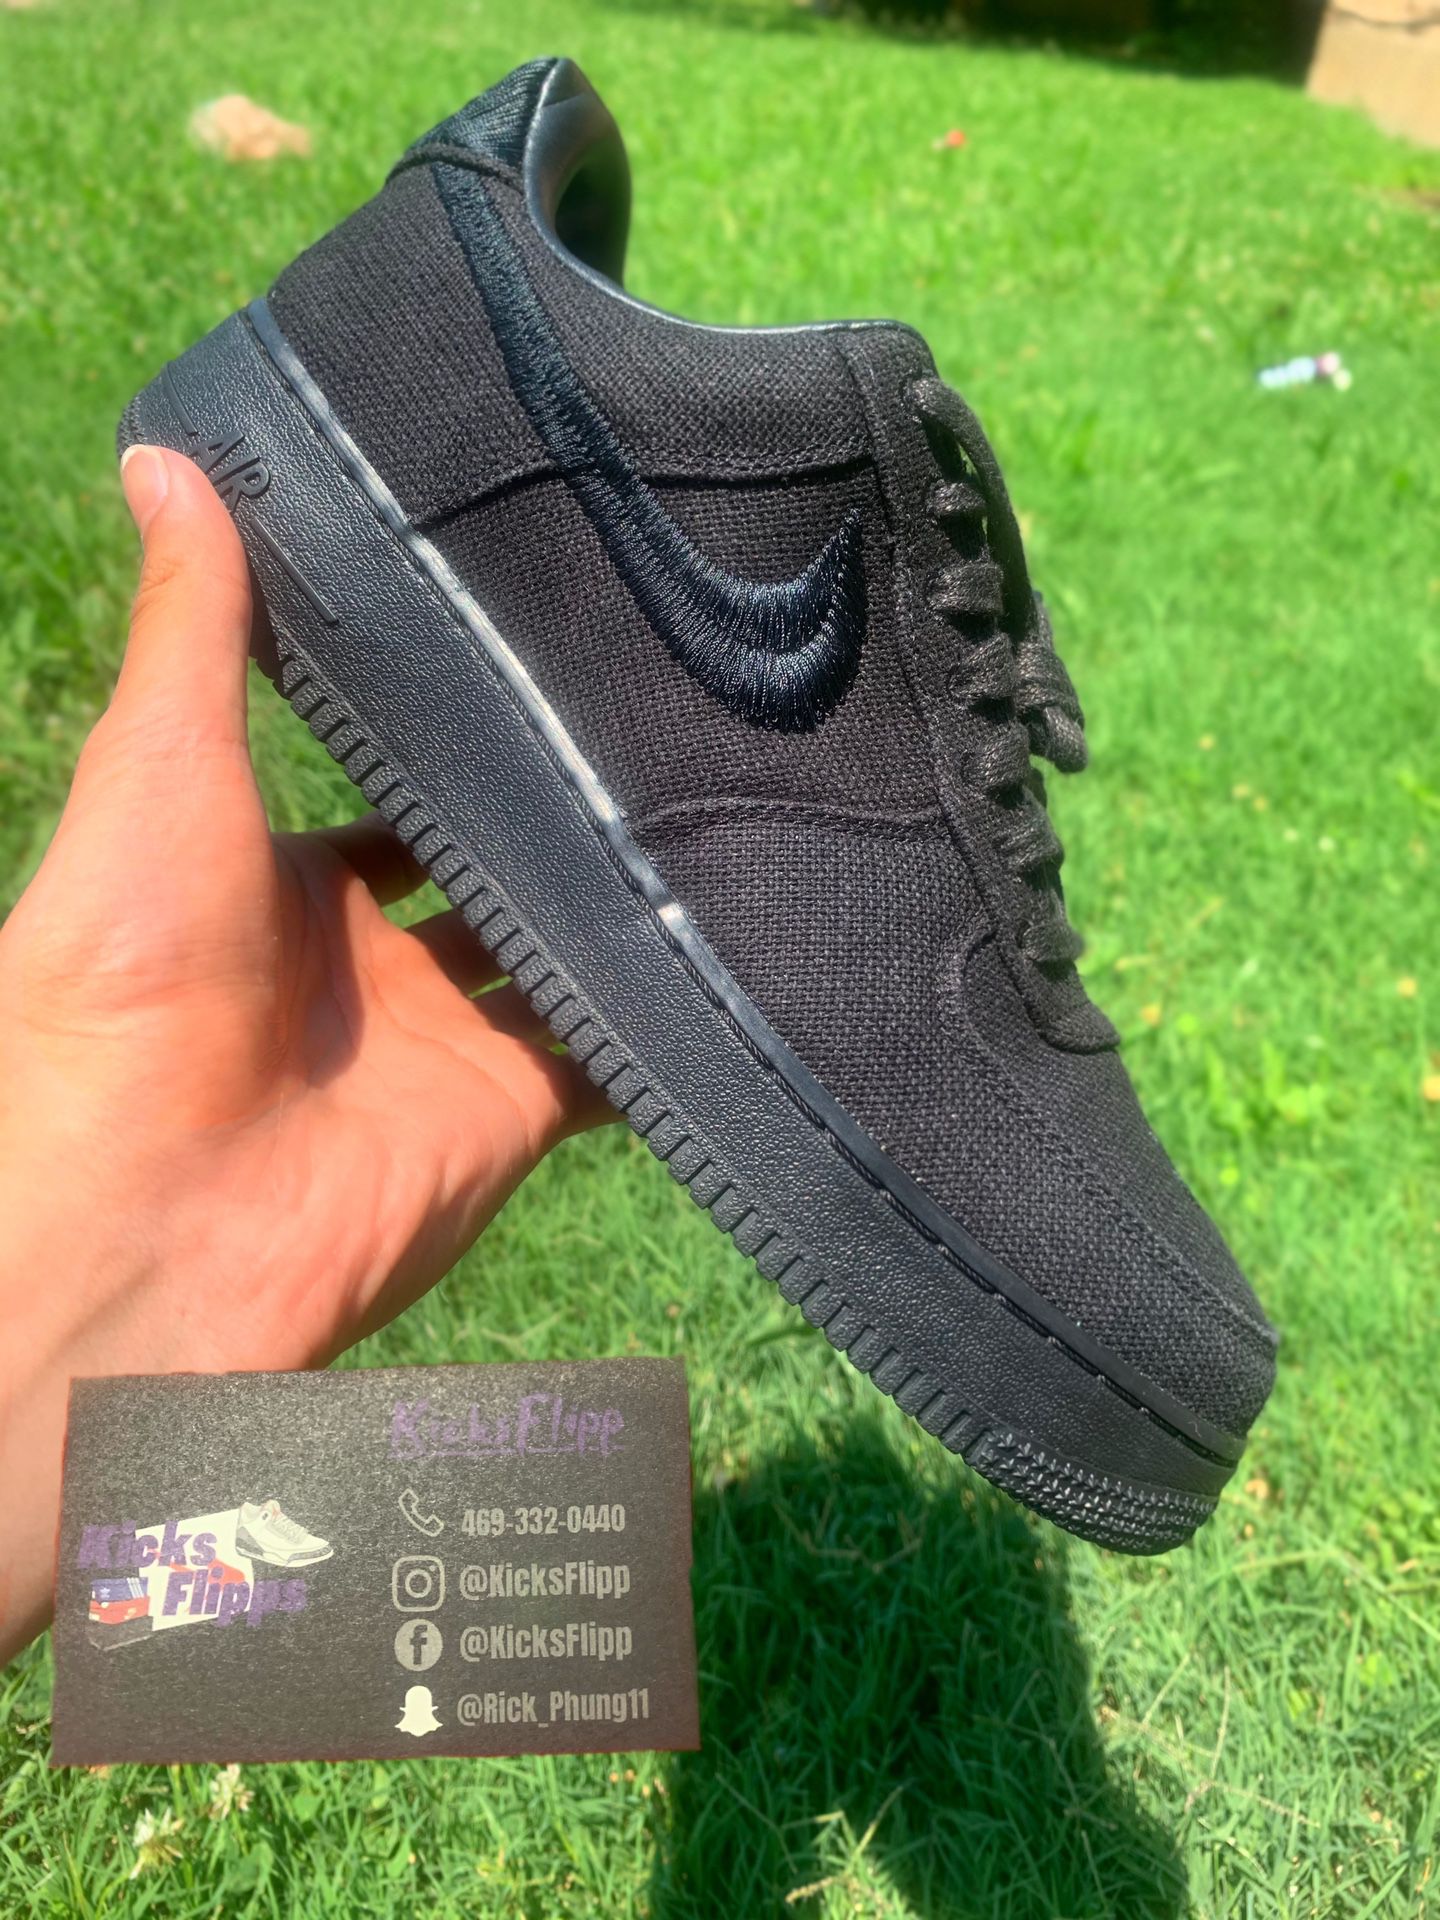 Stussy X Air Force 1 Low Black Size 10 for Sale in Lewisville, TX - OfferUp